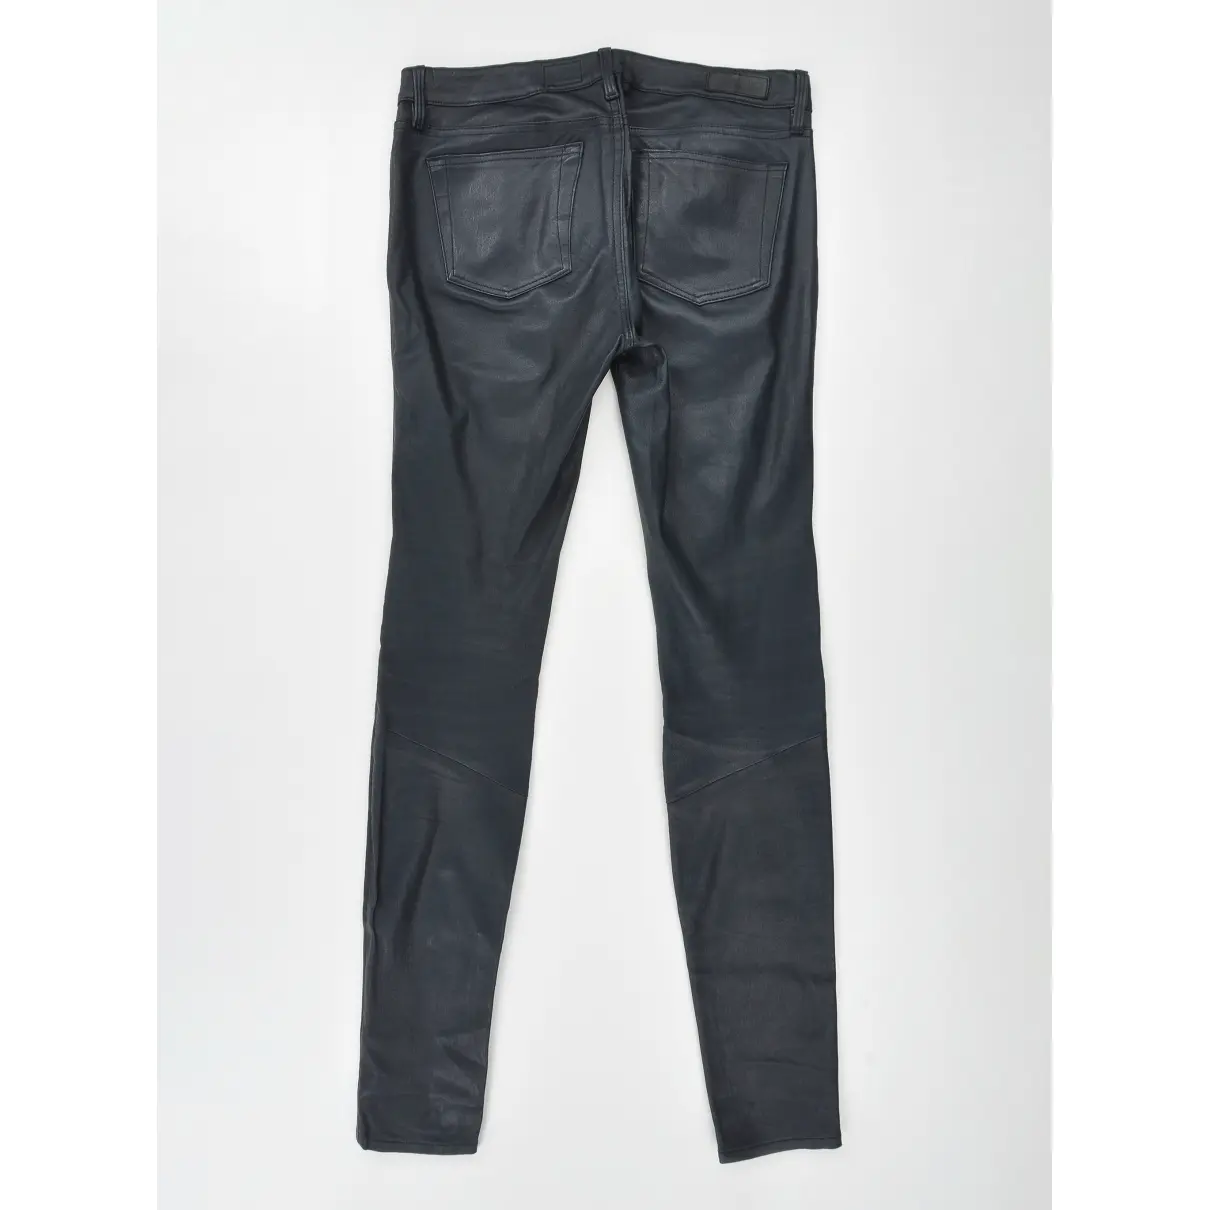 Buy Ag Adriano Goldschmied Leather slim pants online